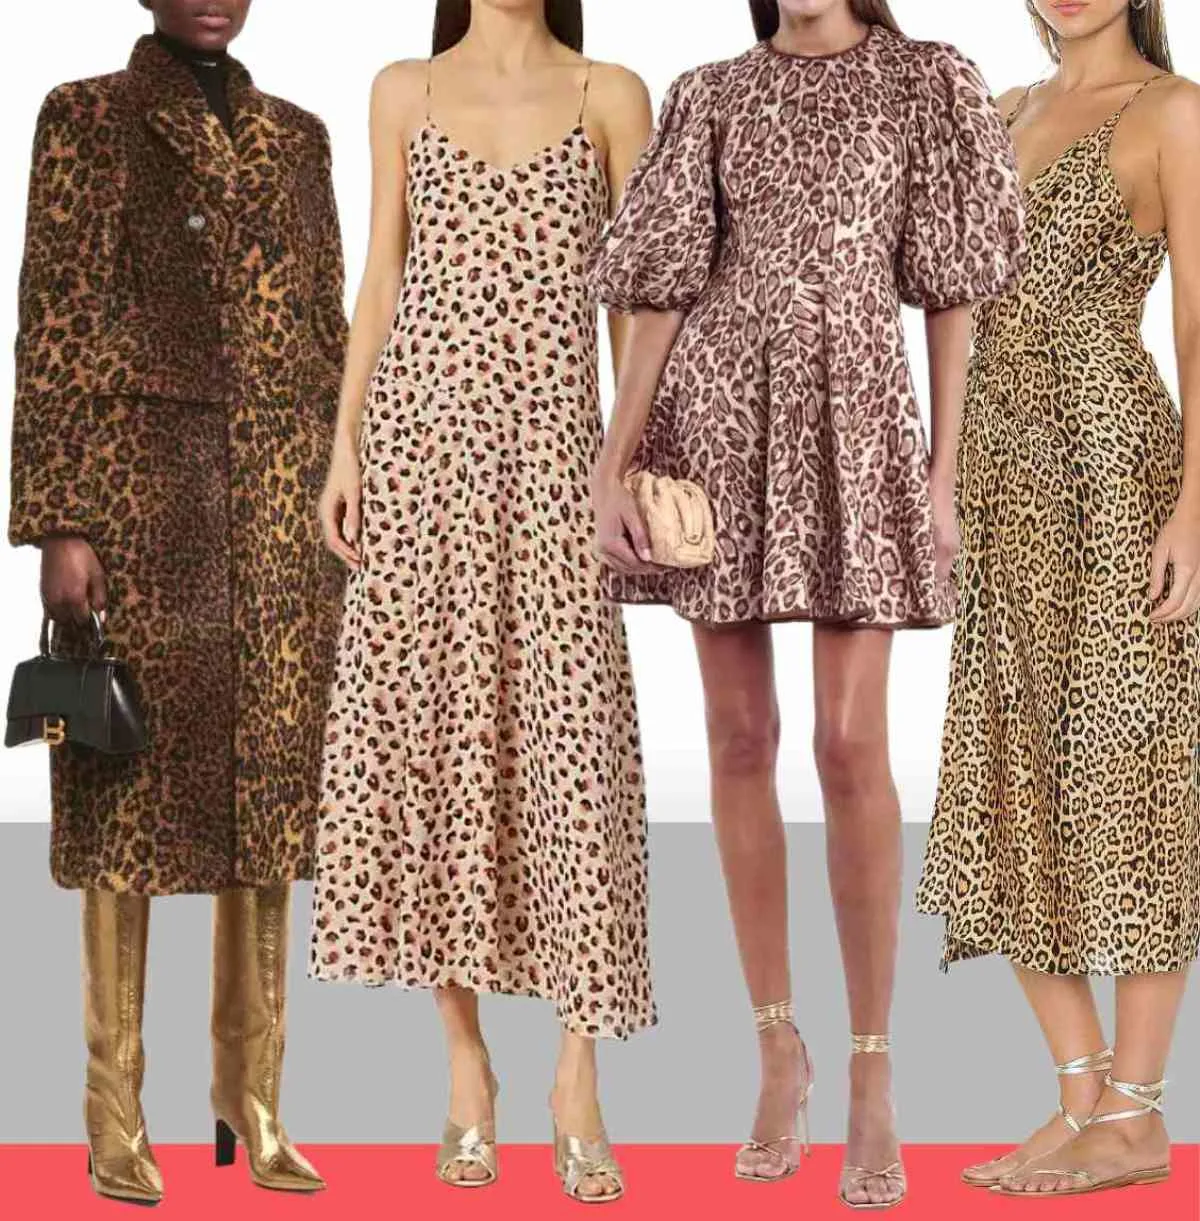 3 women wearing different gold color shoes with leopard print dress outfits.